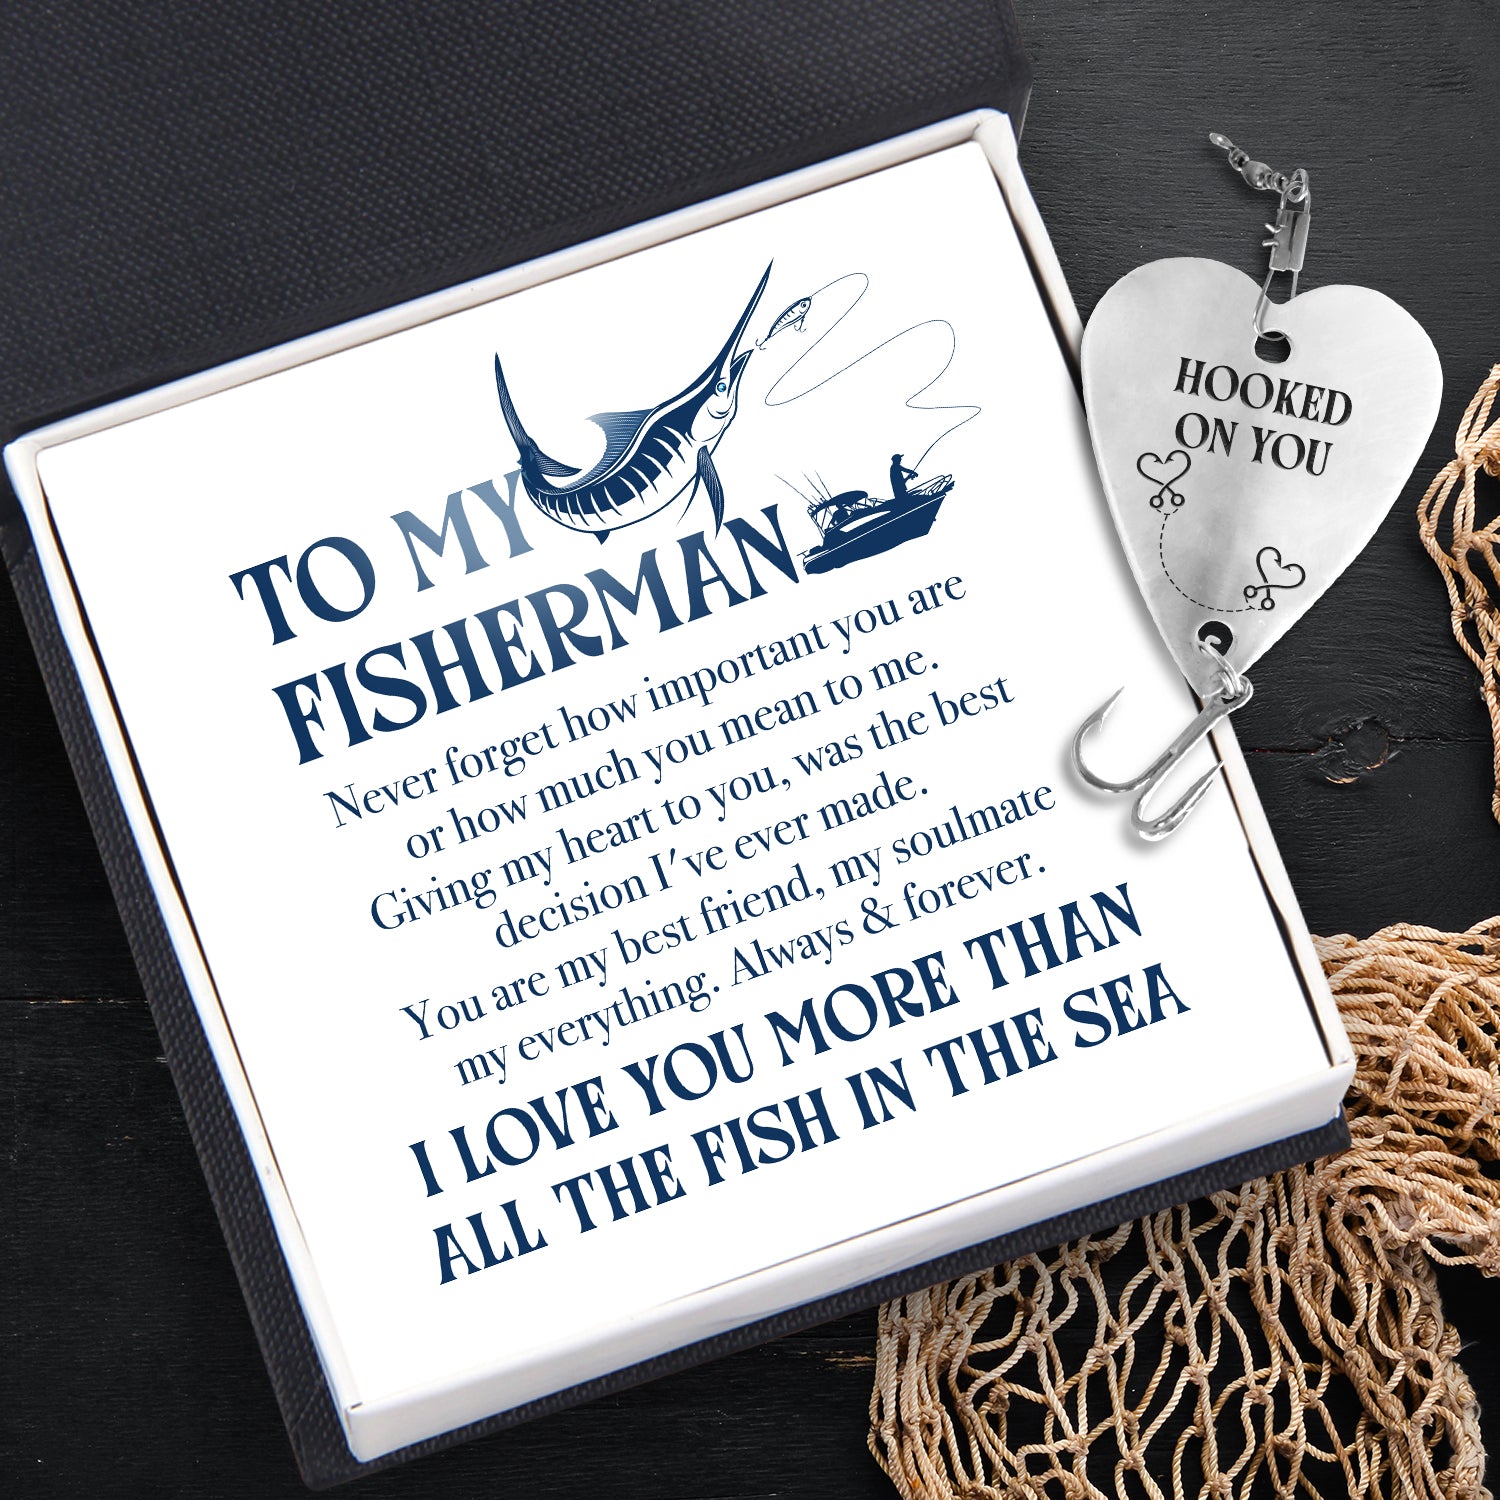 Heart Fishing Lure - Fishing - To My Man - I Love You More Than All The Fish In The Sea - Ukgfc26003